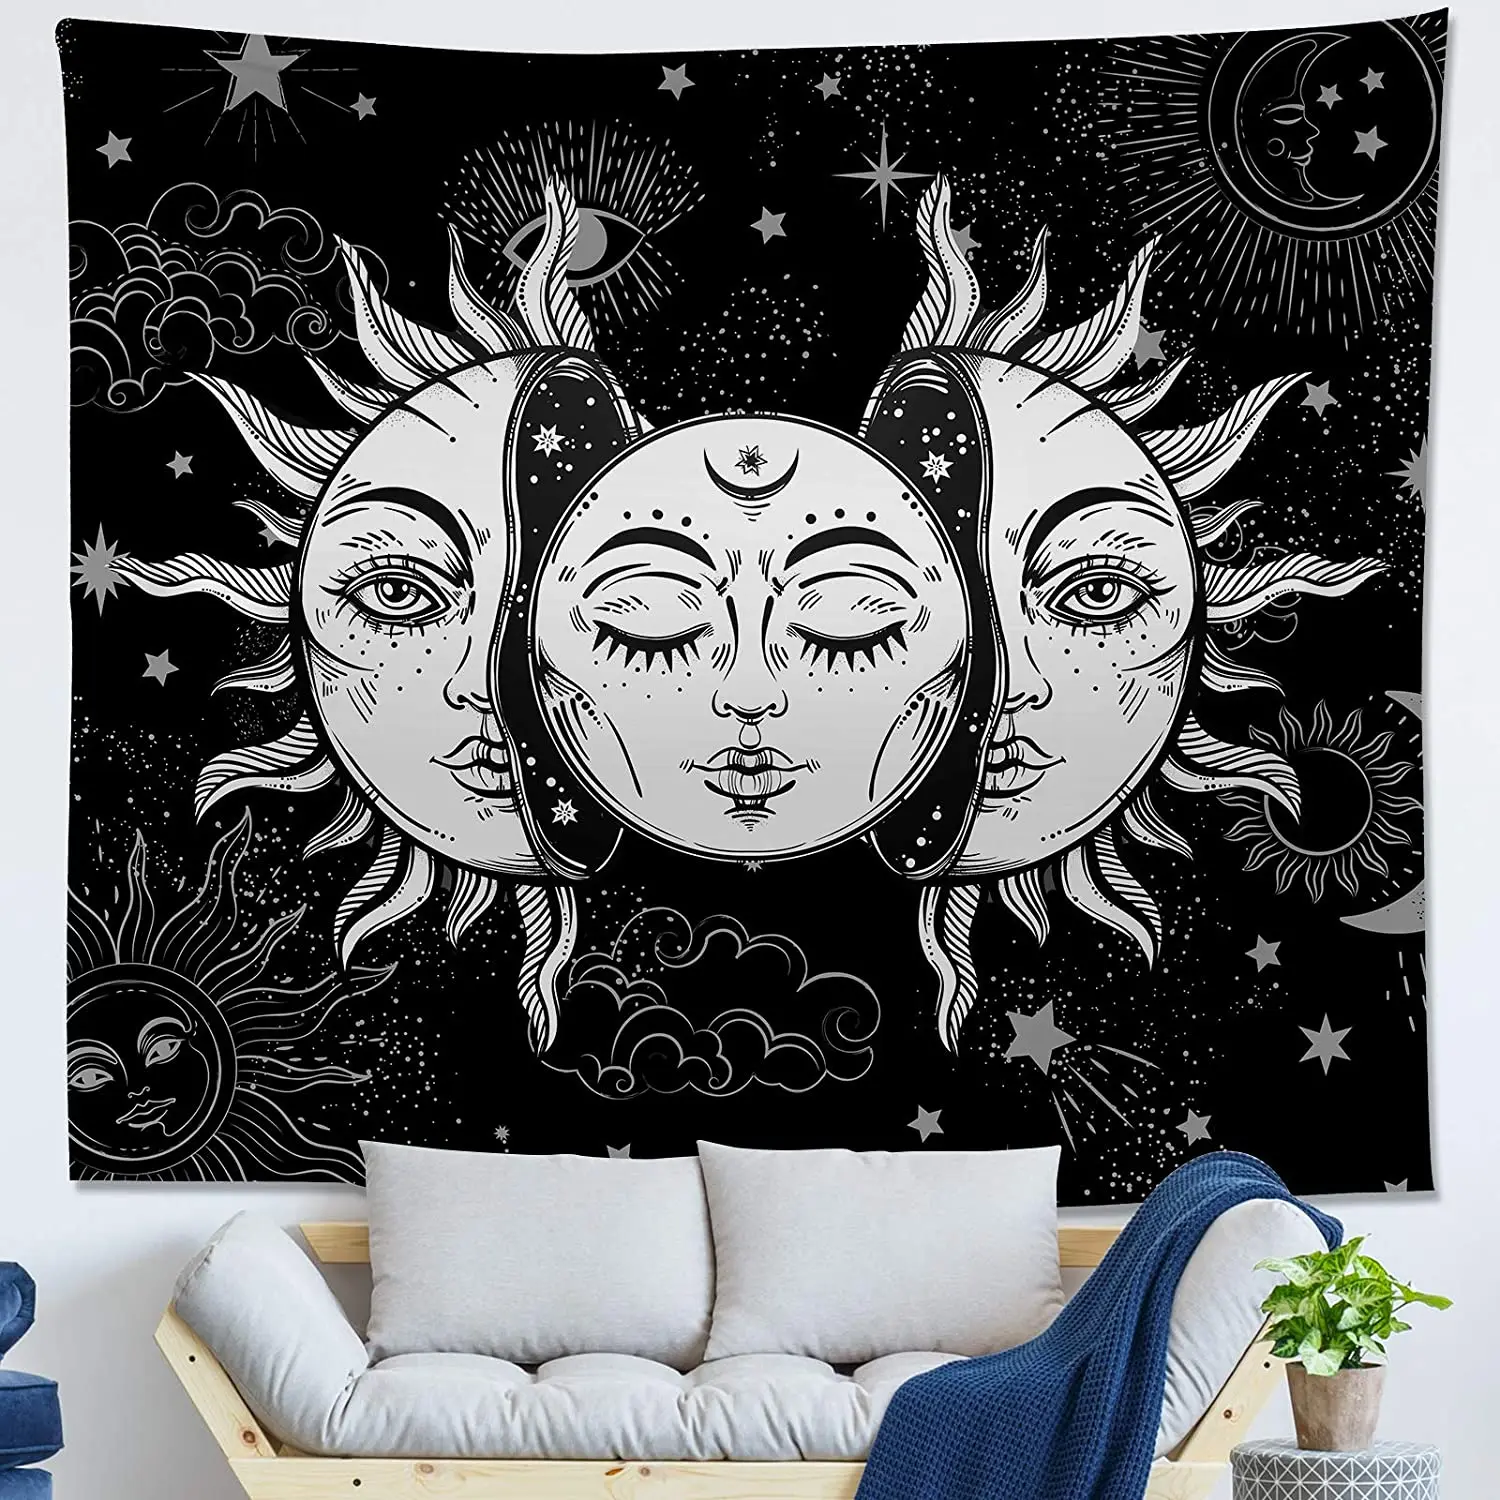 Wholesale Custom Printed Tapestry Abstract Bohemian Mandala Psychedelic Mushroom Quality Wall Hanging Living Room Tapestry